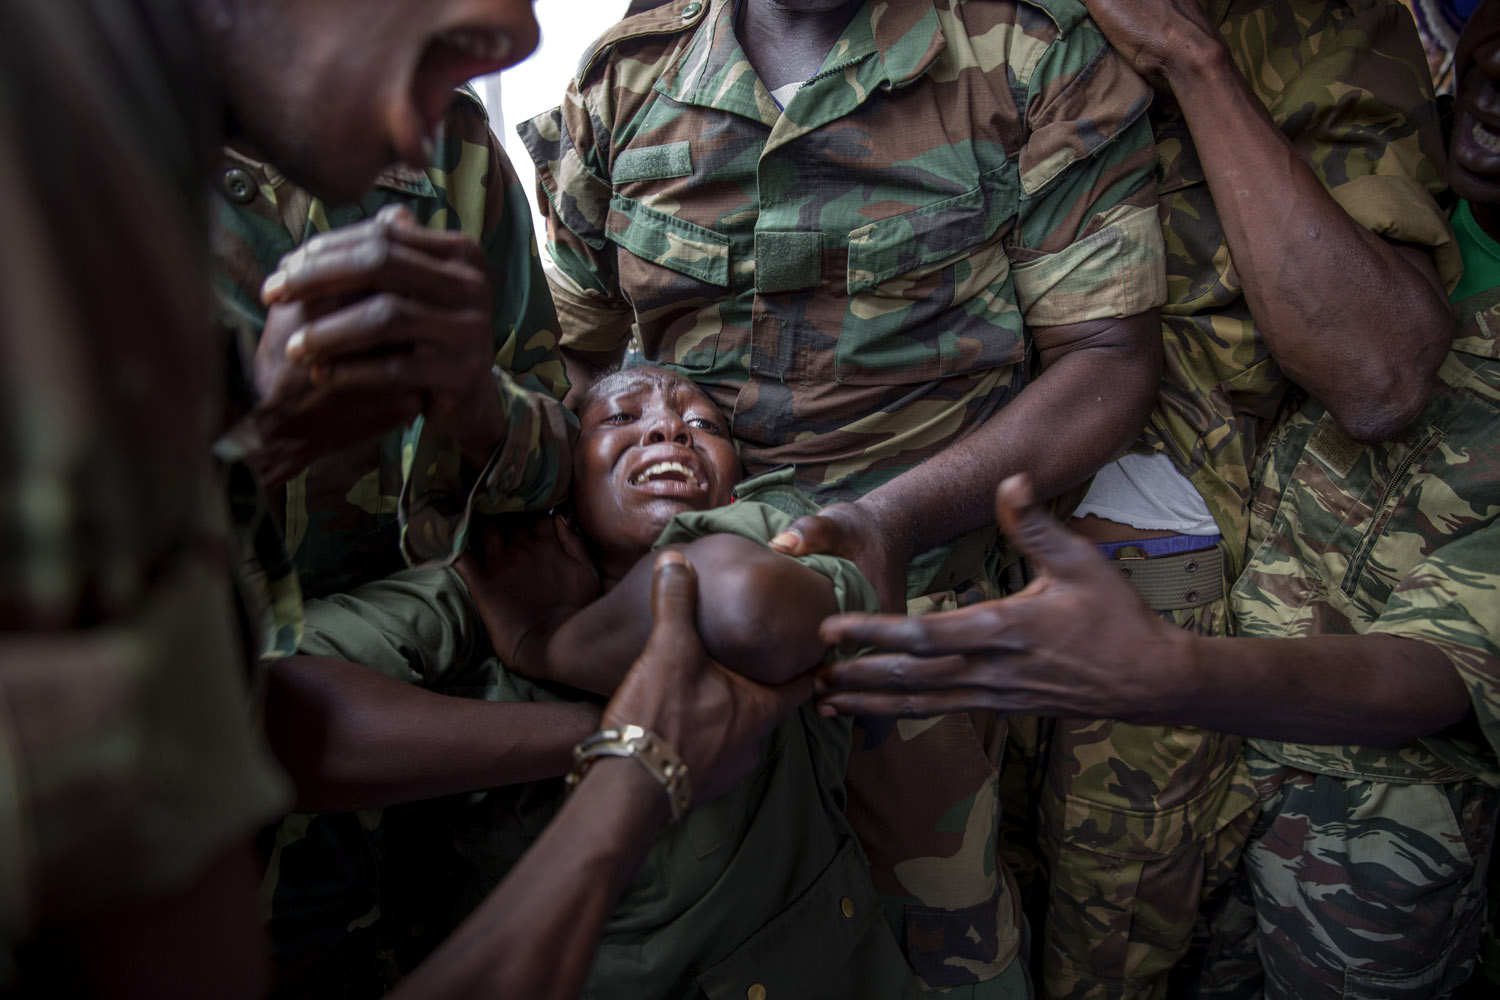 Army soldiers cry the death of colleague Tanguy Residou, who was shot dead by Seleka members. The man as a nephew of former president Bozizé. Bangui.